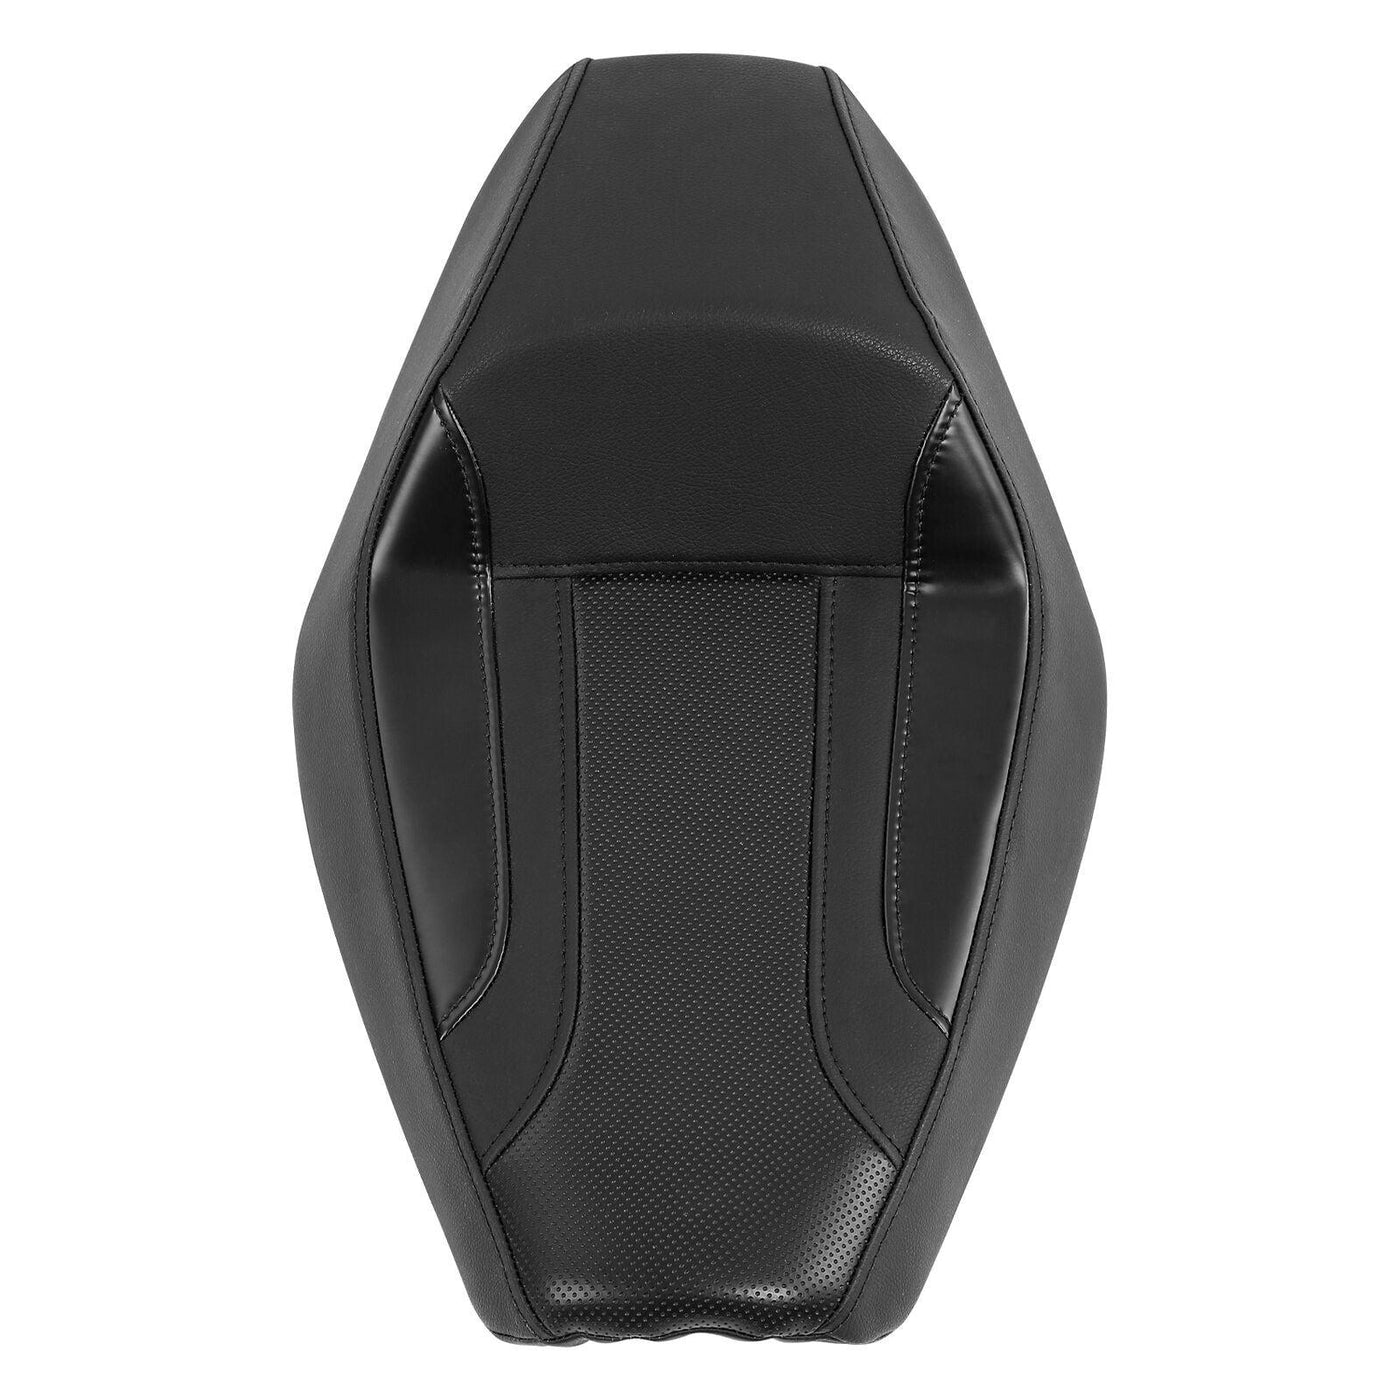 Black Rider Driver Solo Seat Fit For Harley Sportster XL883 1200 48 72 2010-2020 - Moto Life Products